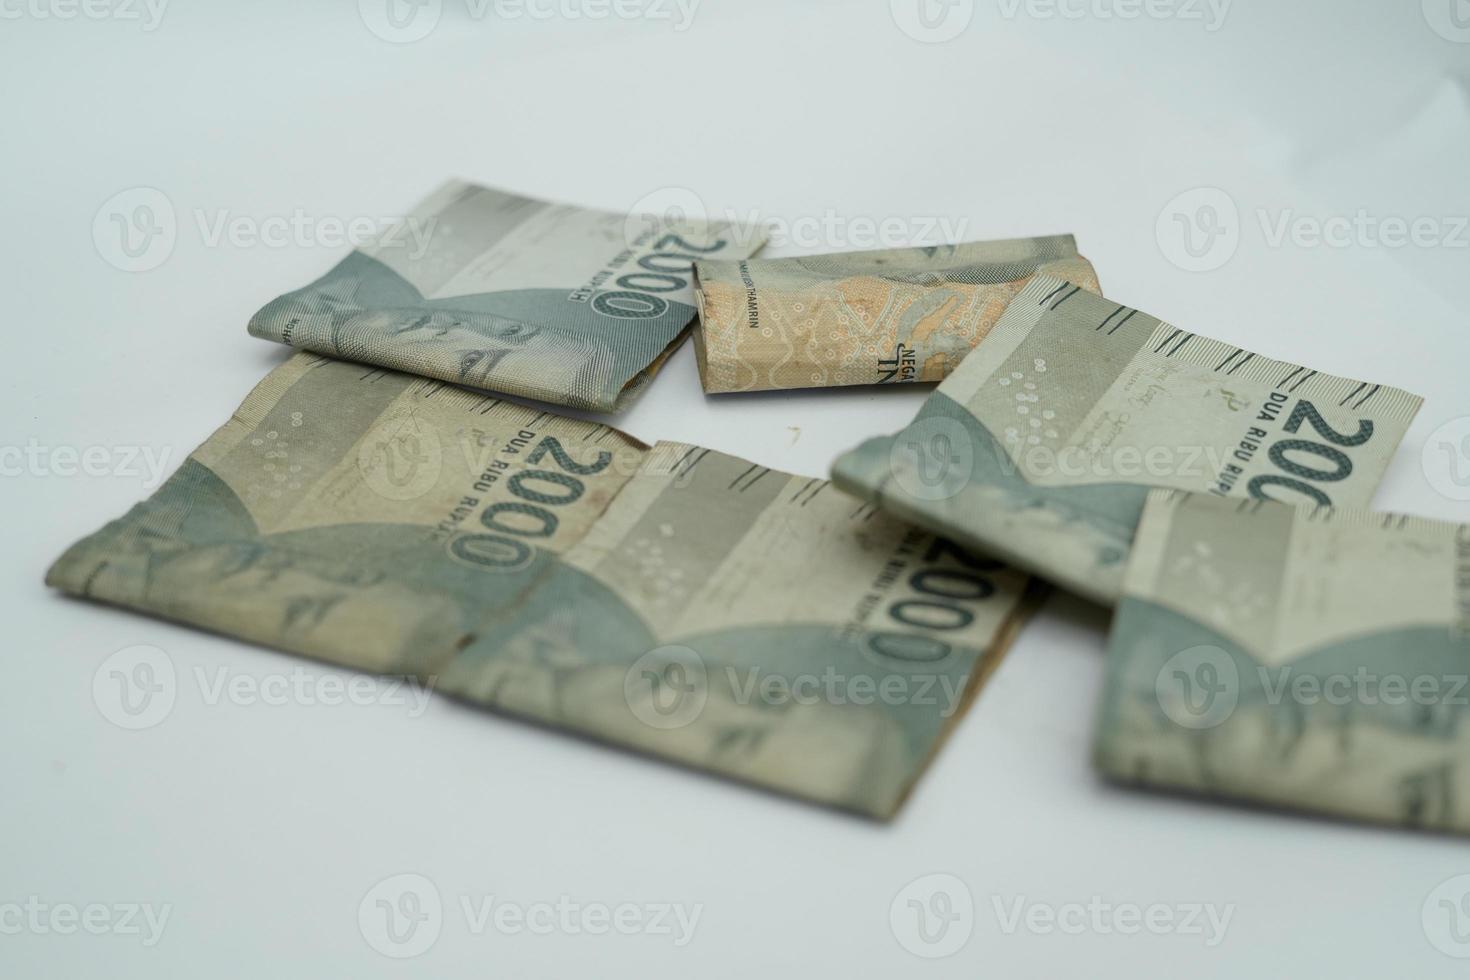 A collection of Indonesian currencies with a value of 2000 rupiah on a white background photo